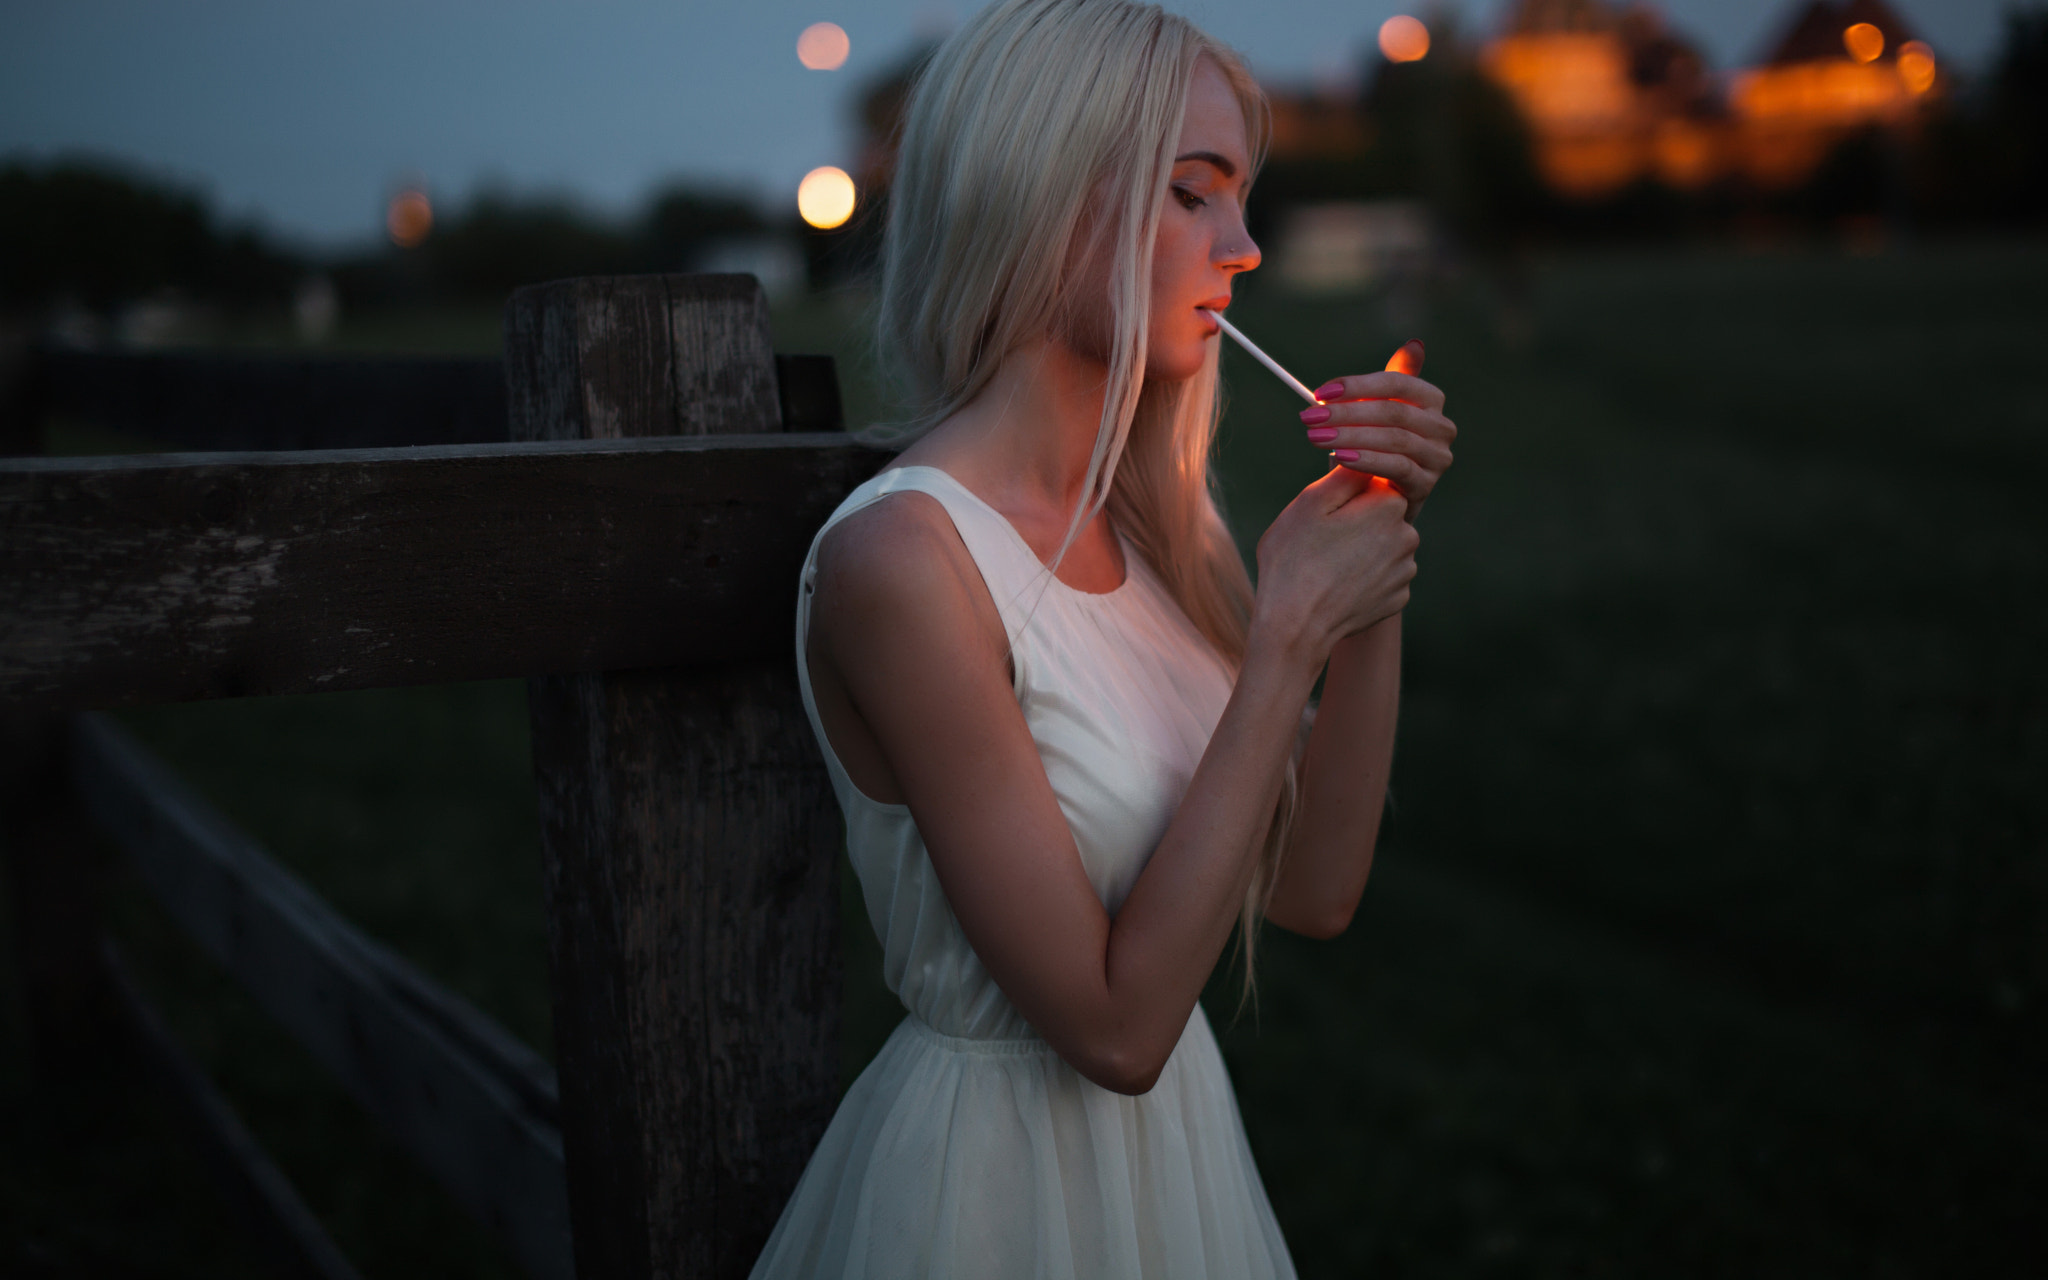 People 2048x1280 women blonde white dress smoking pink nails side view Andrey Frolov profile women outdoors dress white clothing 500px dyed hair painted nails standing model